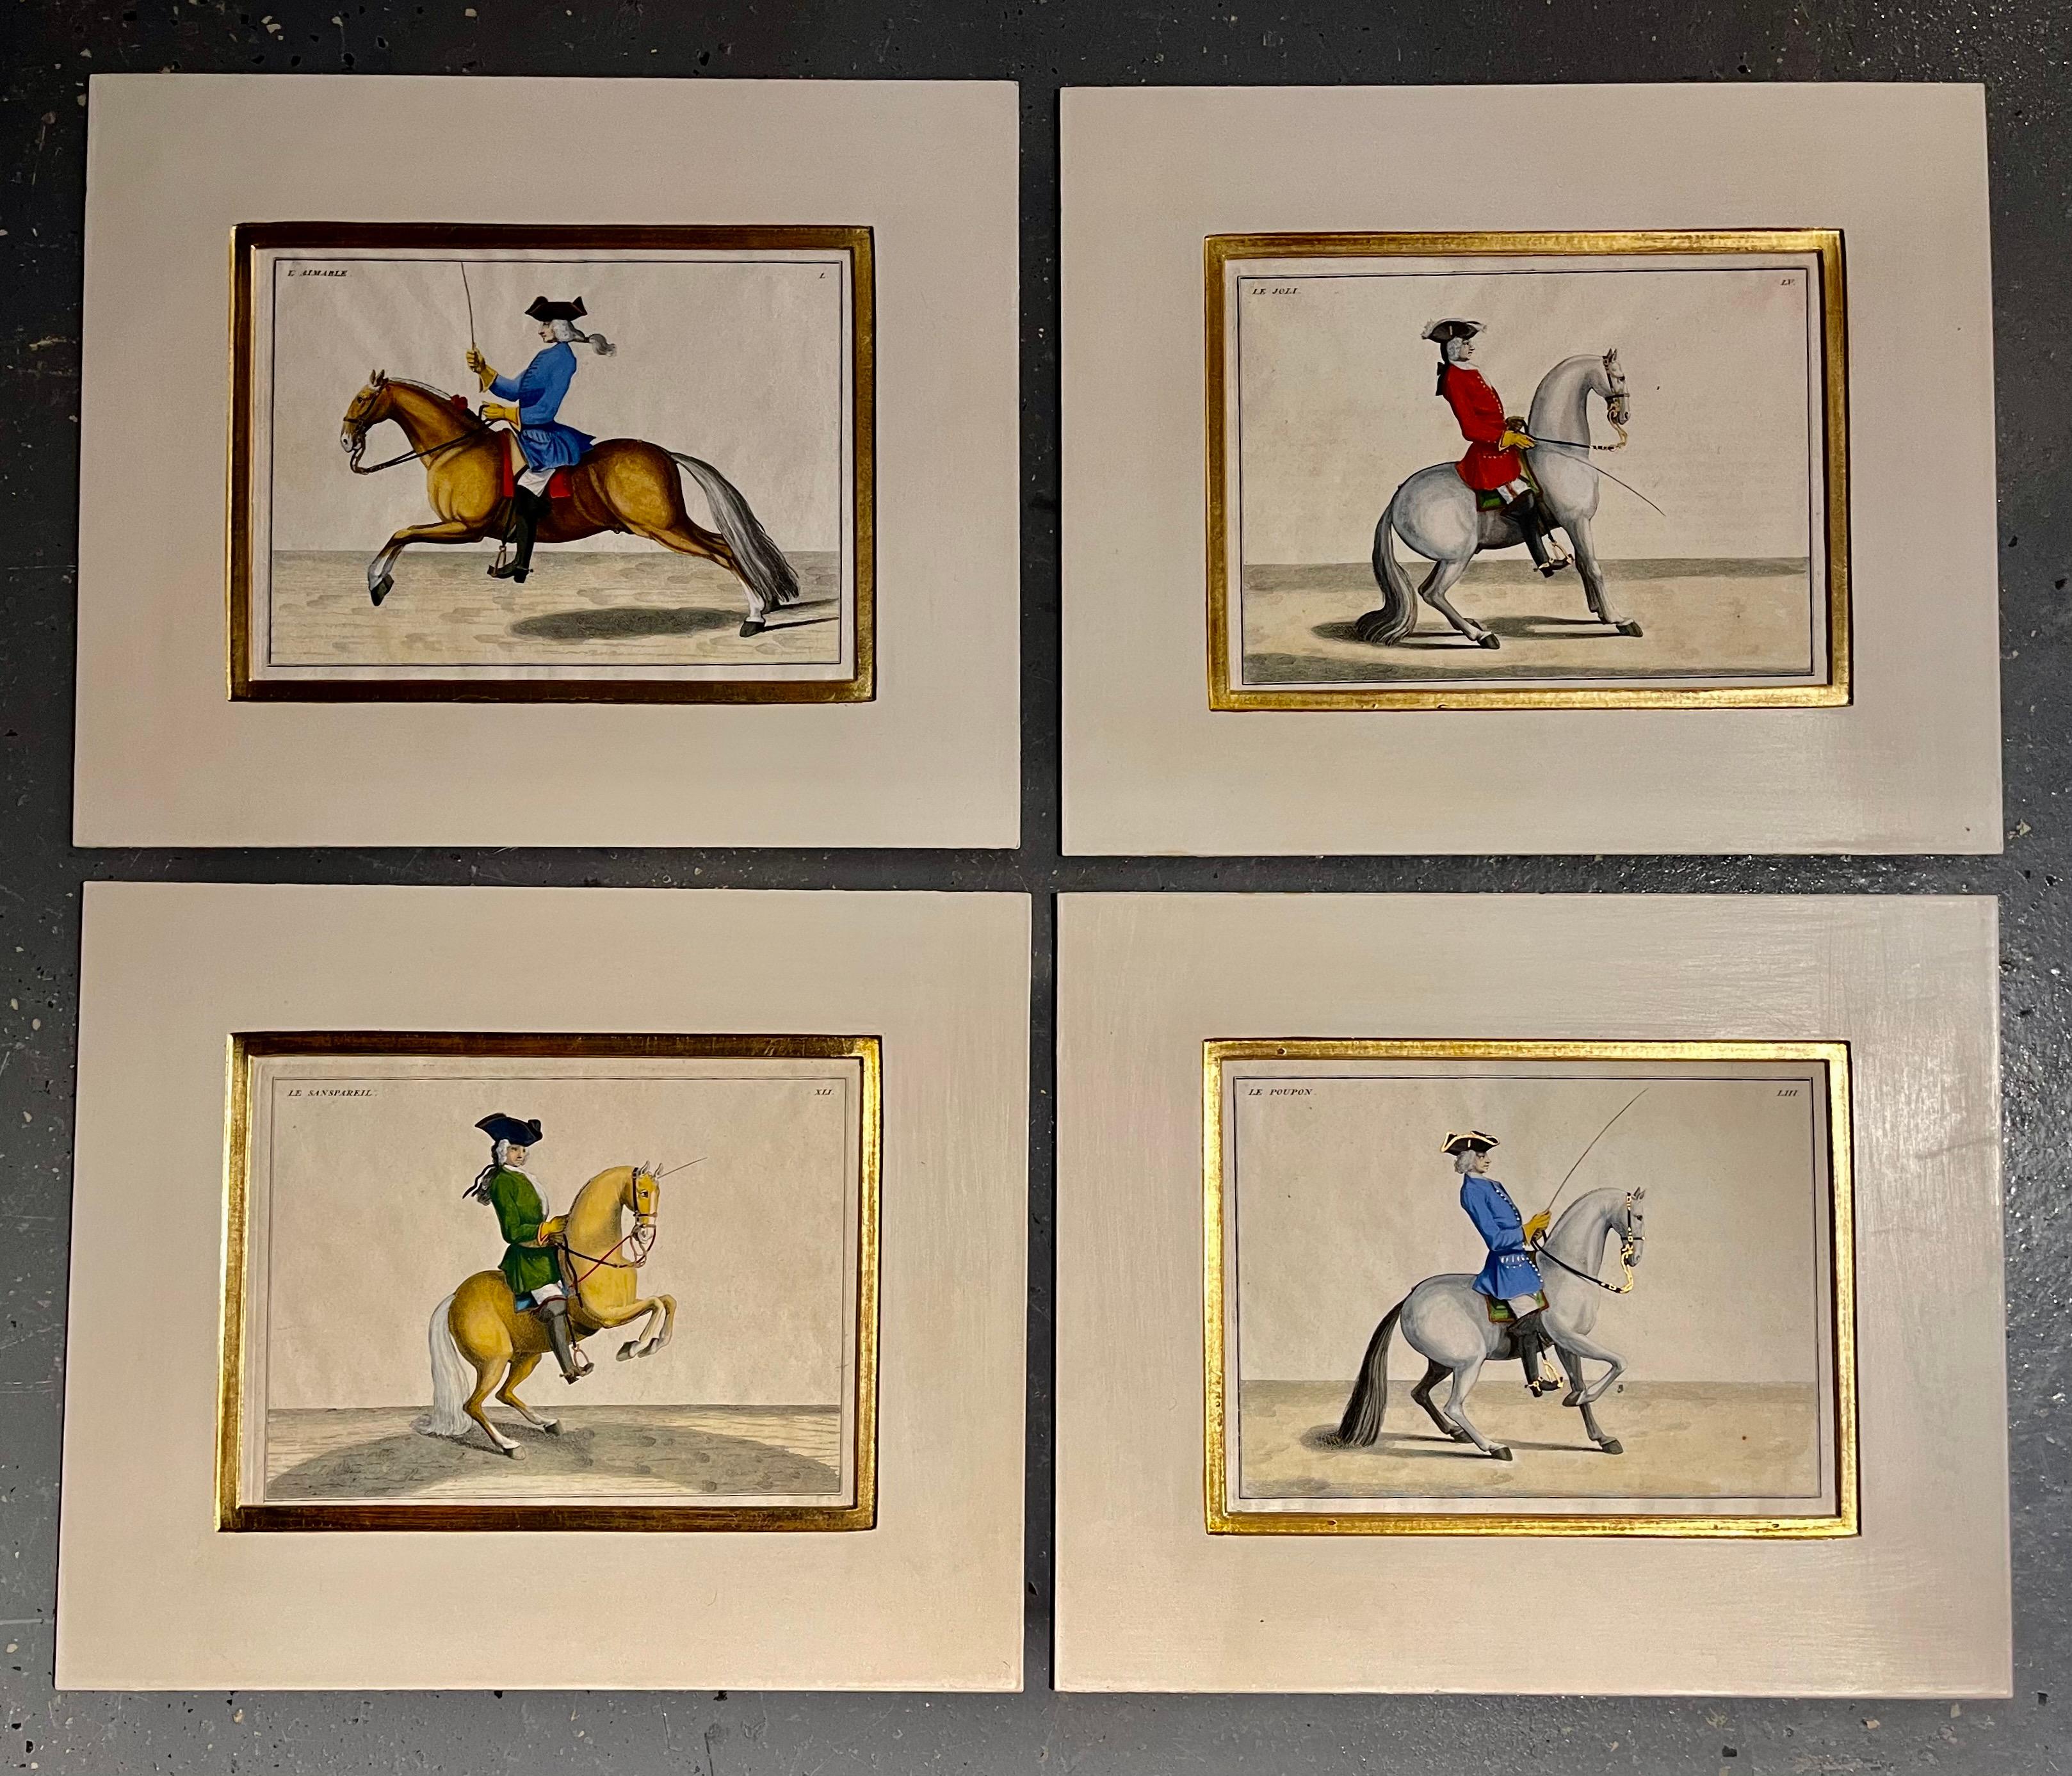 Four Engravings of Horse Riders L' Aimable, Le Joli, Le Sanspareil, Le Poupon. Each is finely matted having a gilt gold border. One of several groupings.
This is part of our extensive collection which just arrived from Chicago's renowned interior